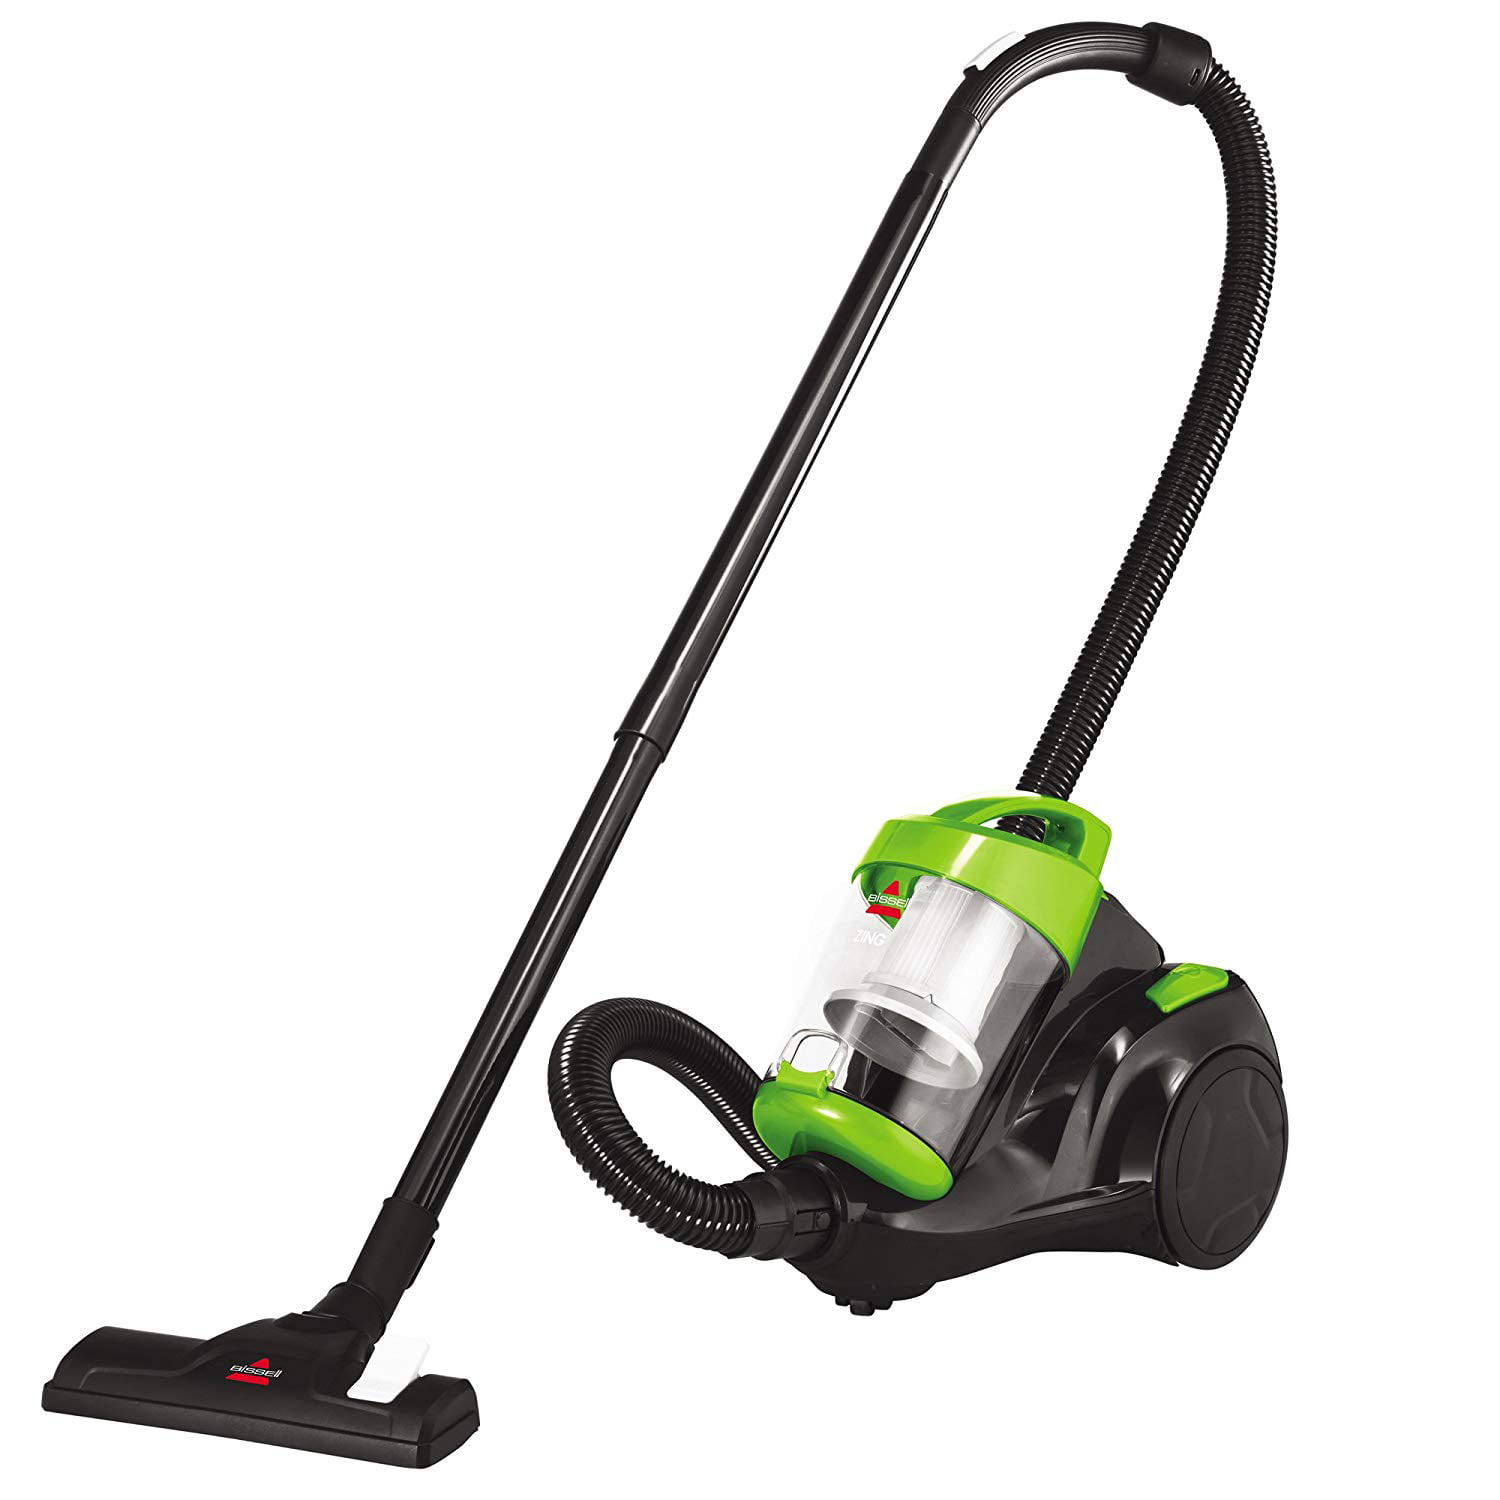 Bissell Canister Bagless Vacuum Cleaner, with Cyclonic Cleaning System